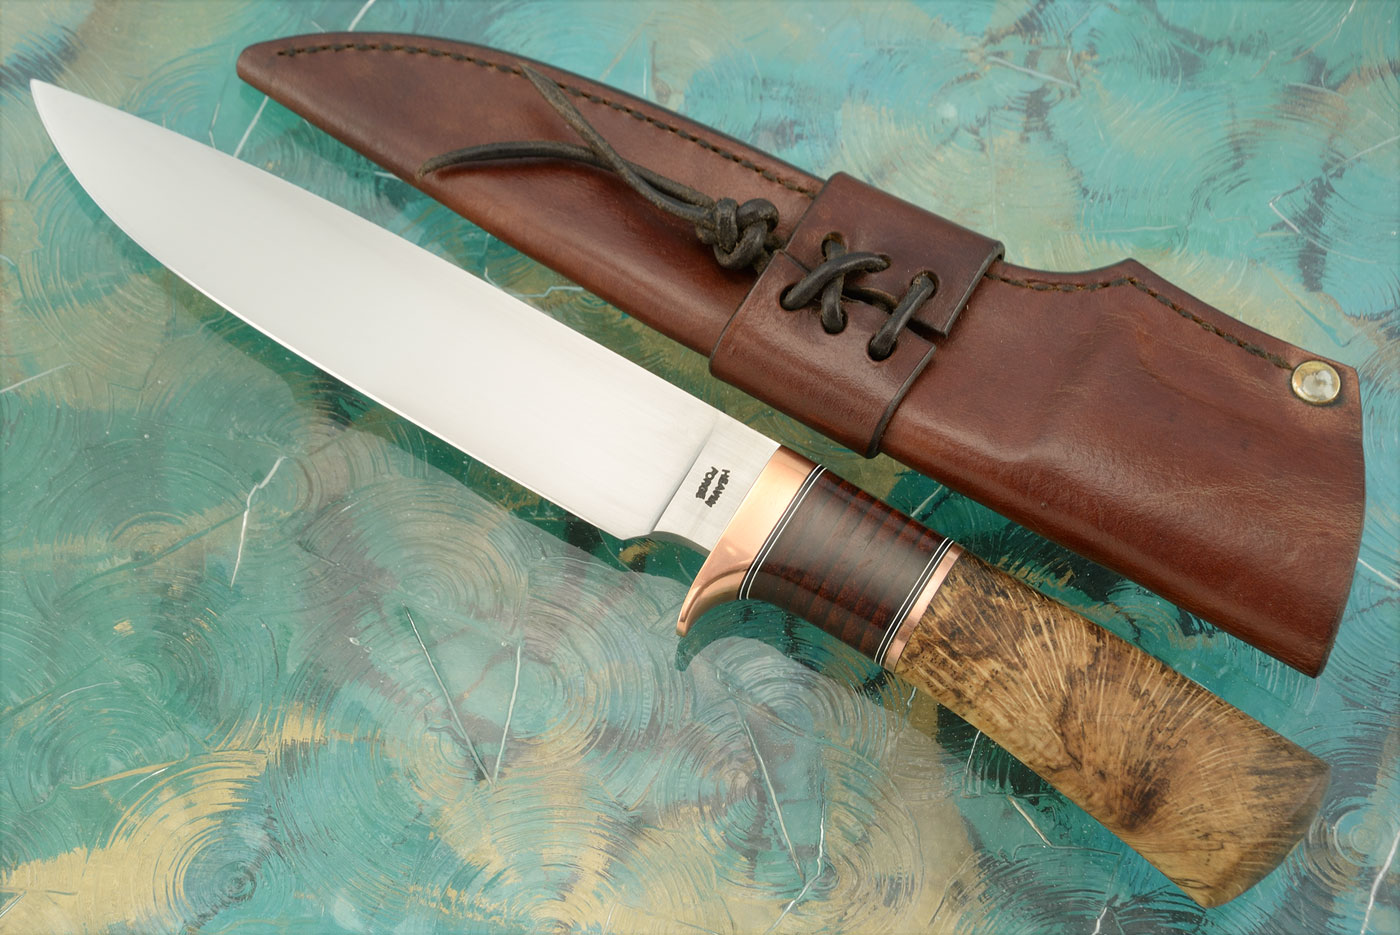 Forged Camp Knife with Cape Cork Oak and Stacked Leather